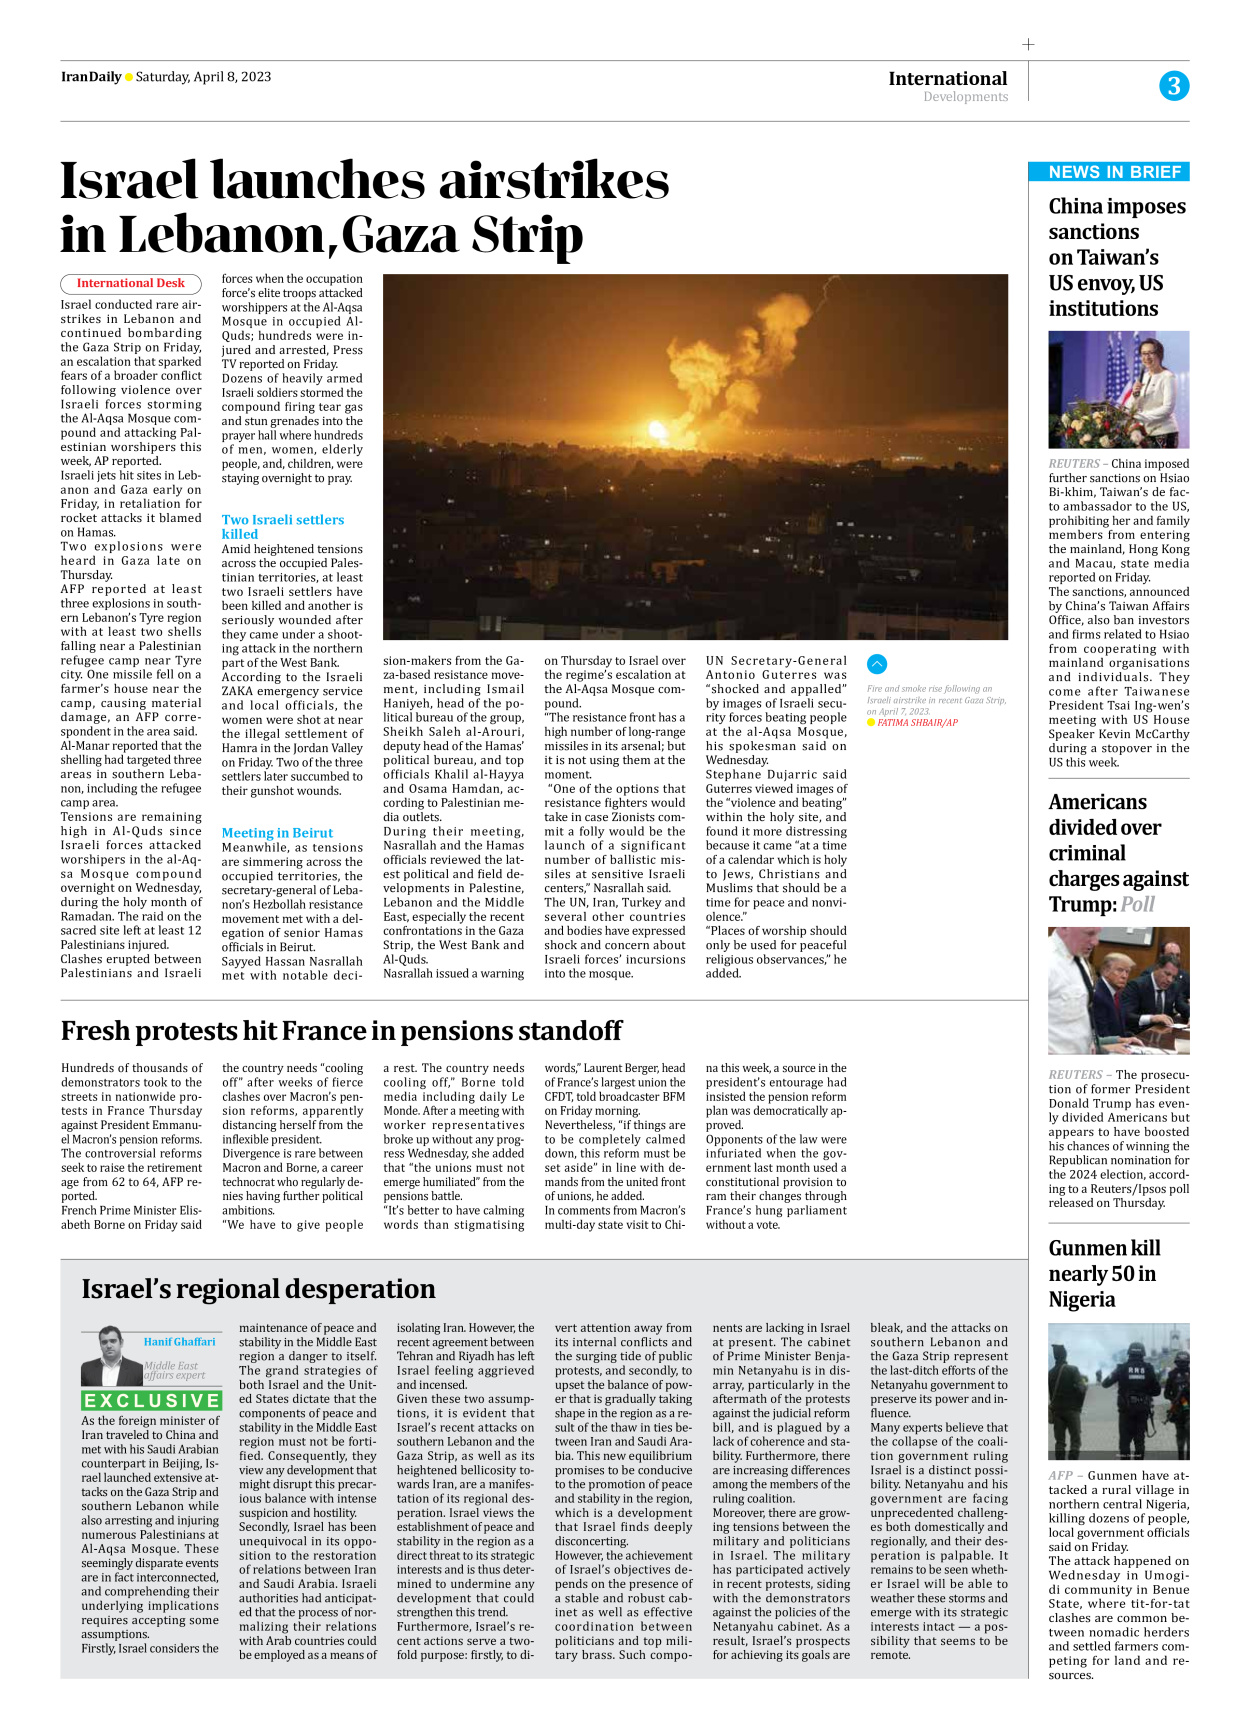 Iran Daily - Number Seven Thousand Two Hundred and Sixty Four - 08 April 2023 - Page 3